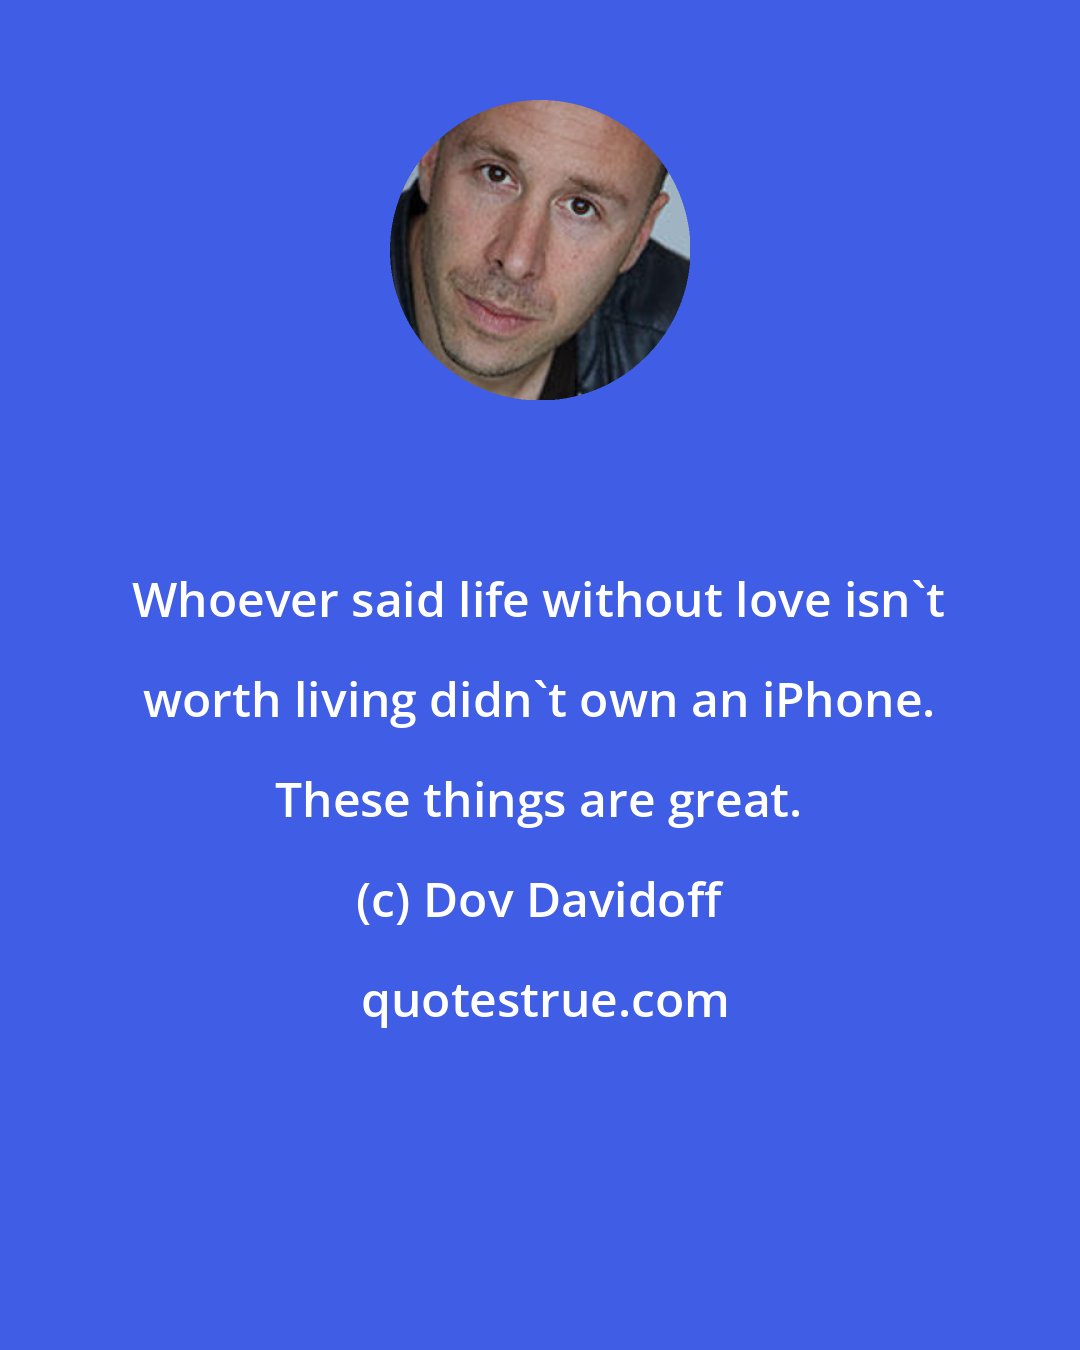 Dov Davidoff: Whoever said life without love isn't worth living didn't own an iPhone. These things are great.